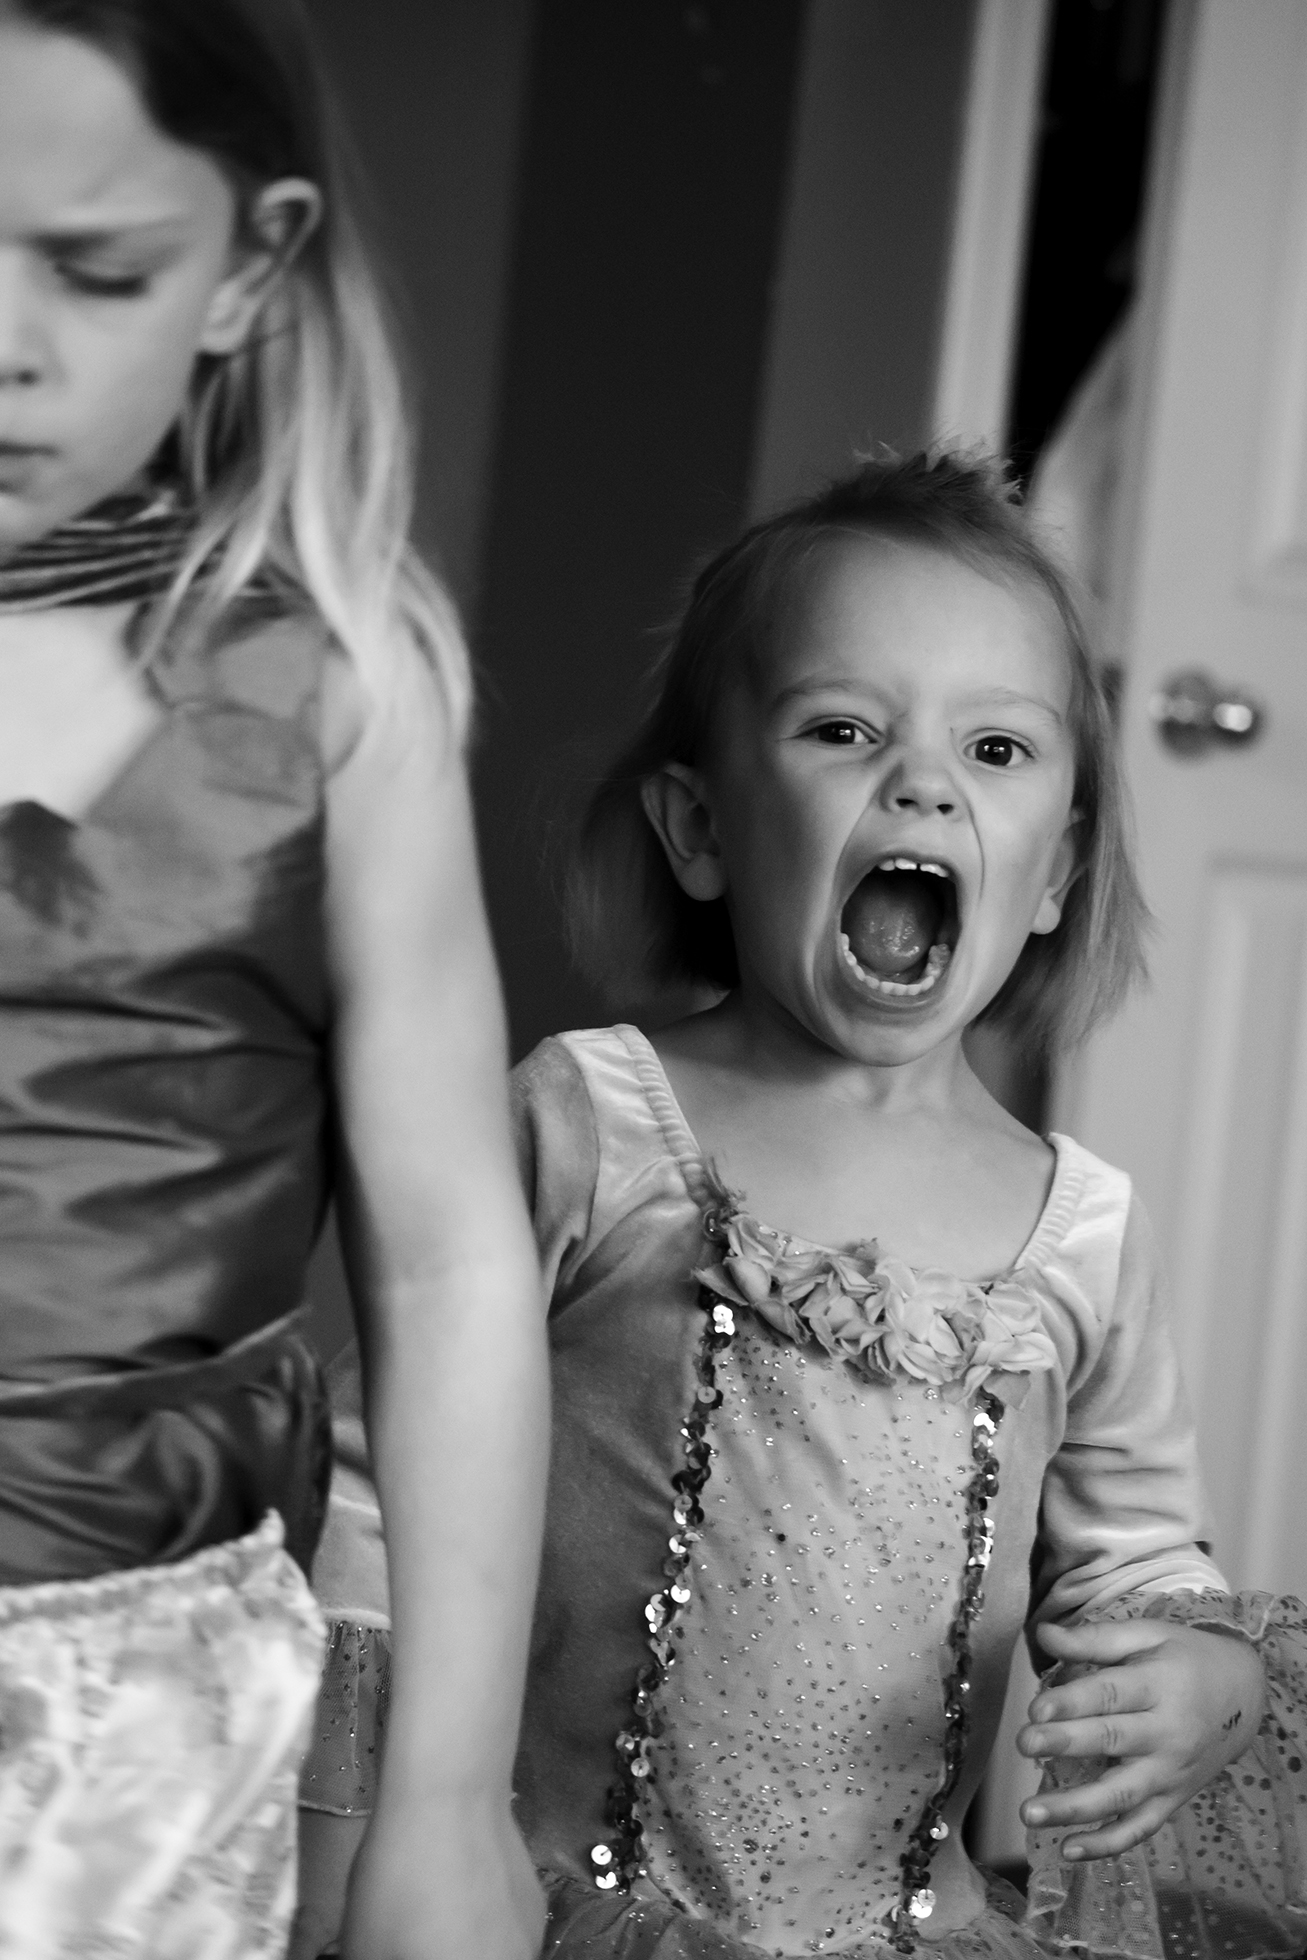 A young girl screaming near an older girl who has her eyes closed and looks frustrated.